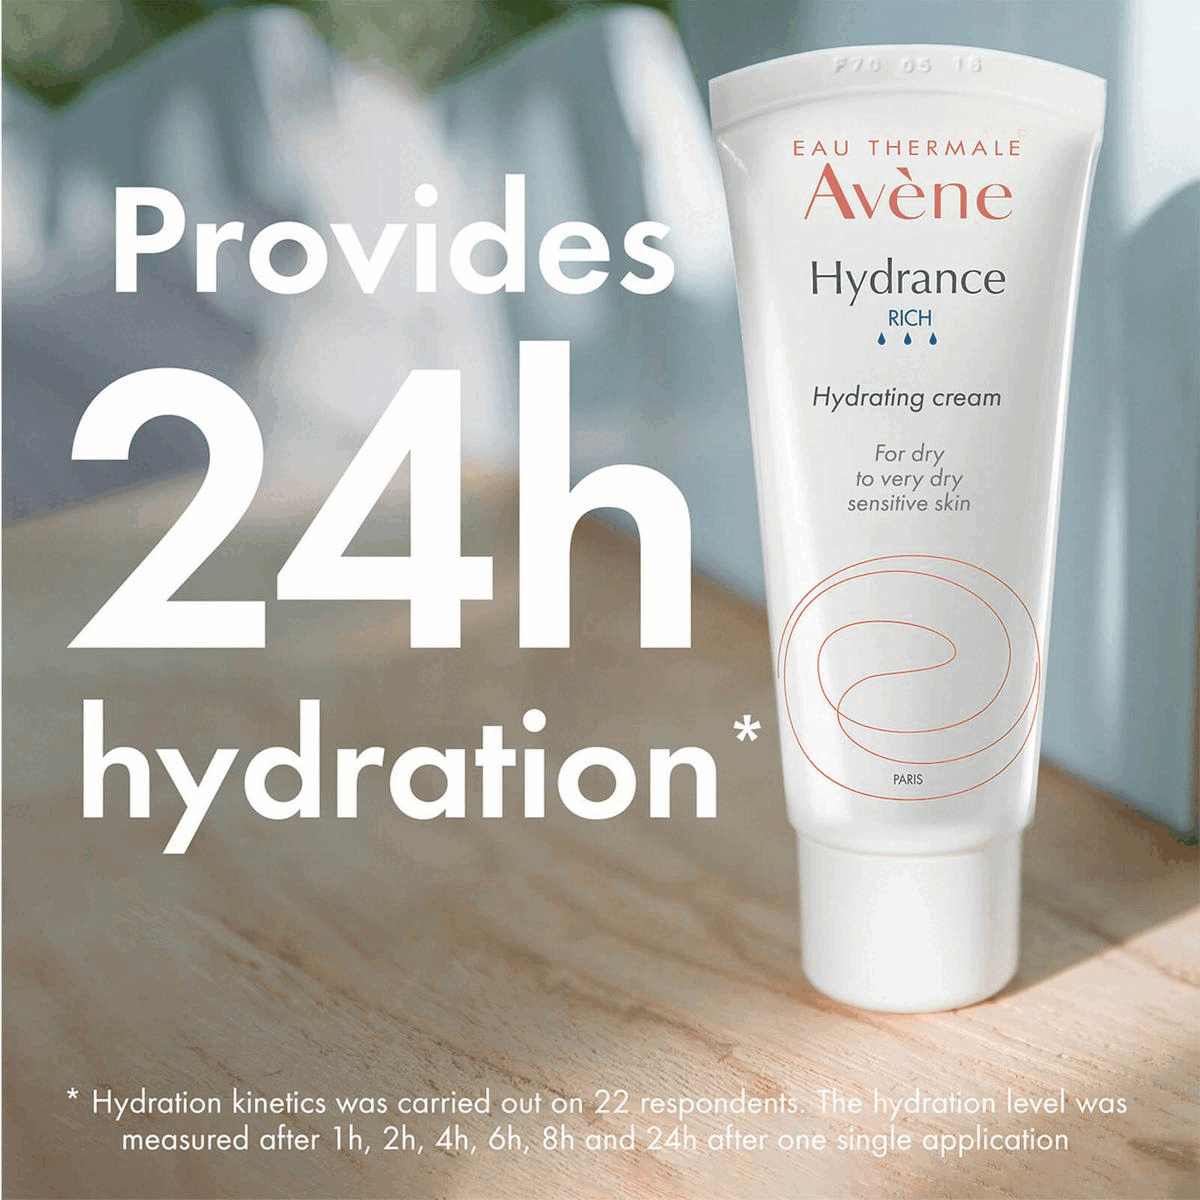 provides 24h hydration. Discover the routine. Tested on sensitive skin, recommended by dermatologists.